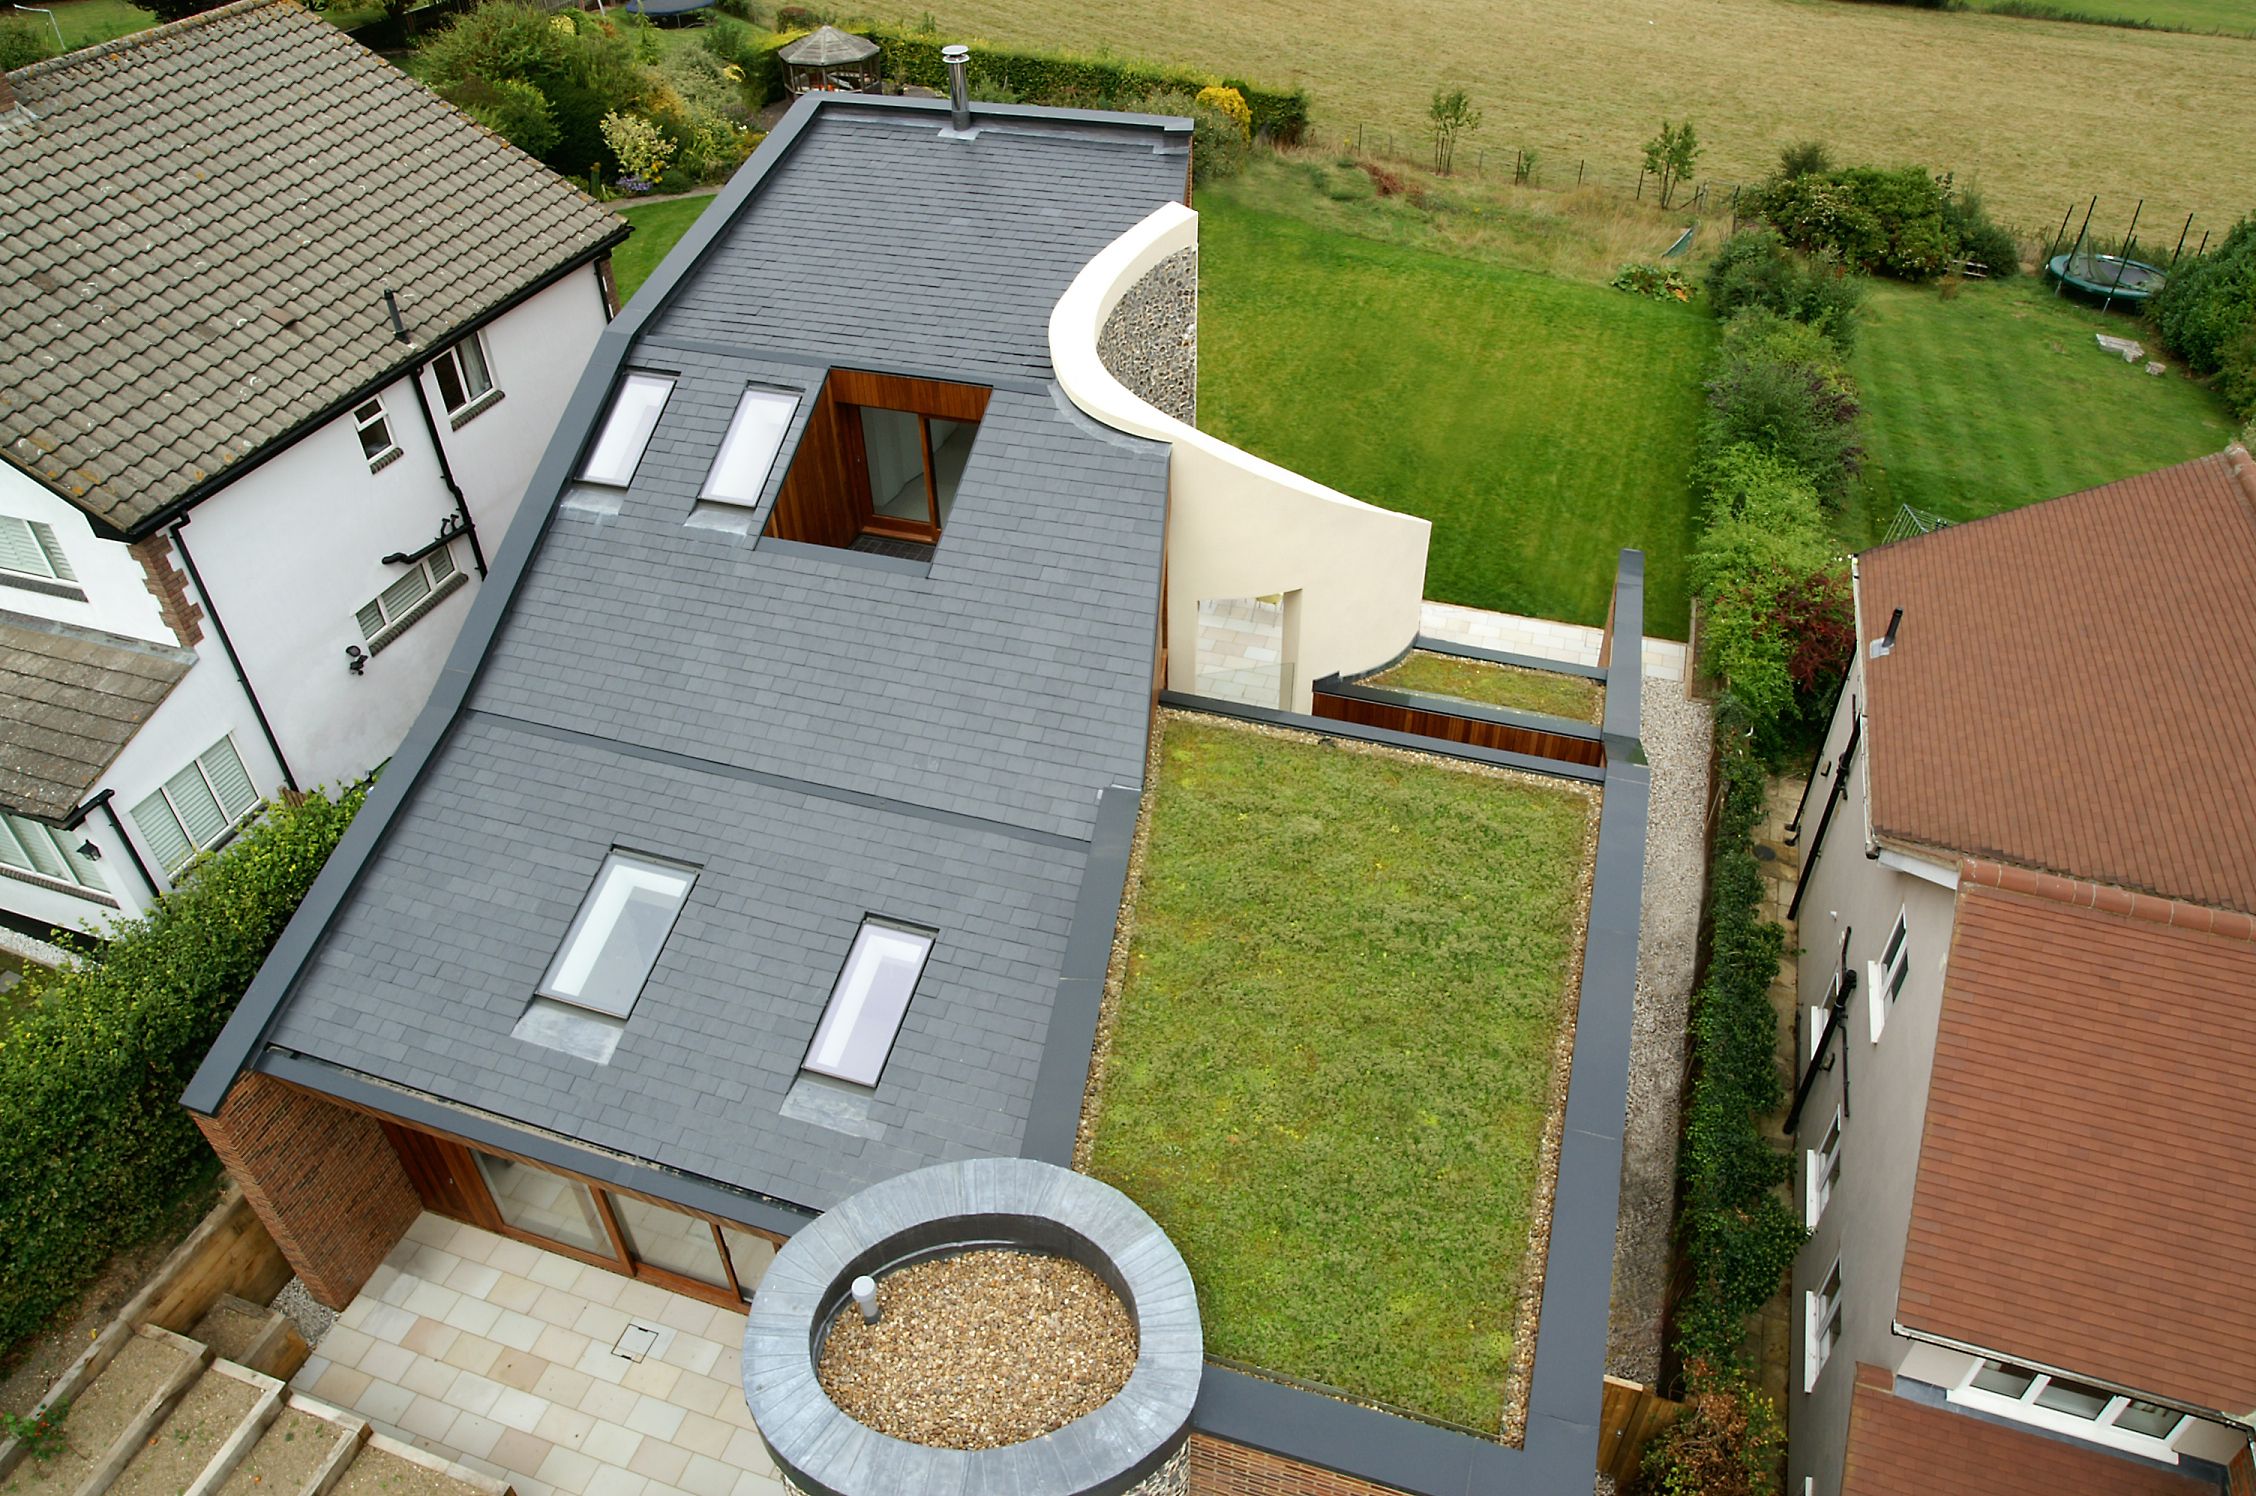 Single Ply Green Roof Installations | Roof Assured by Sika Sarnafil